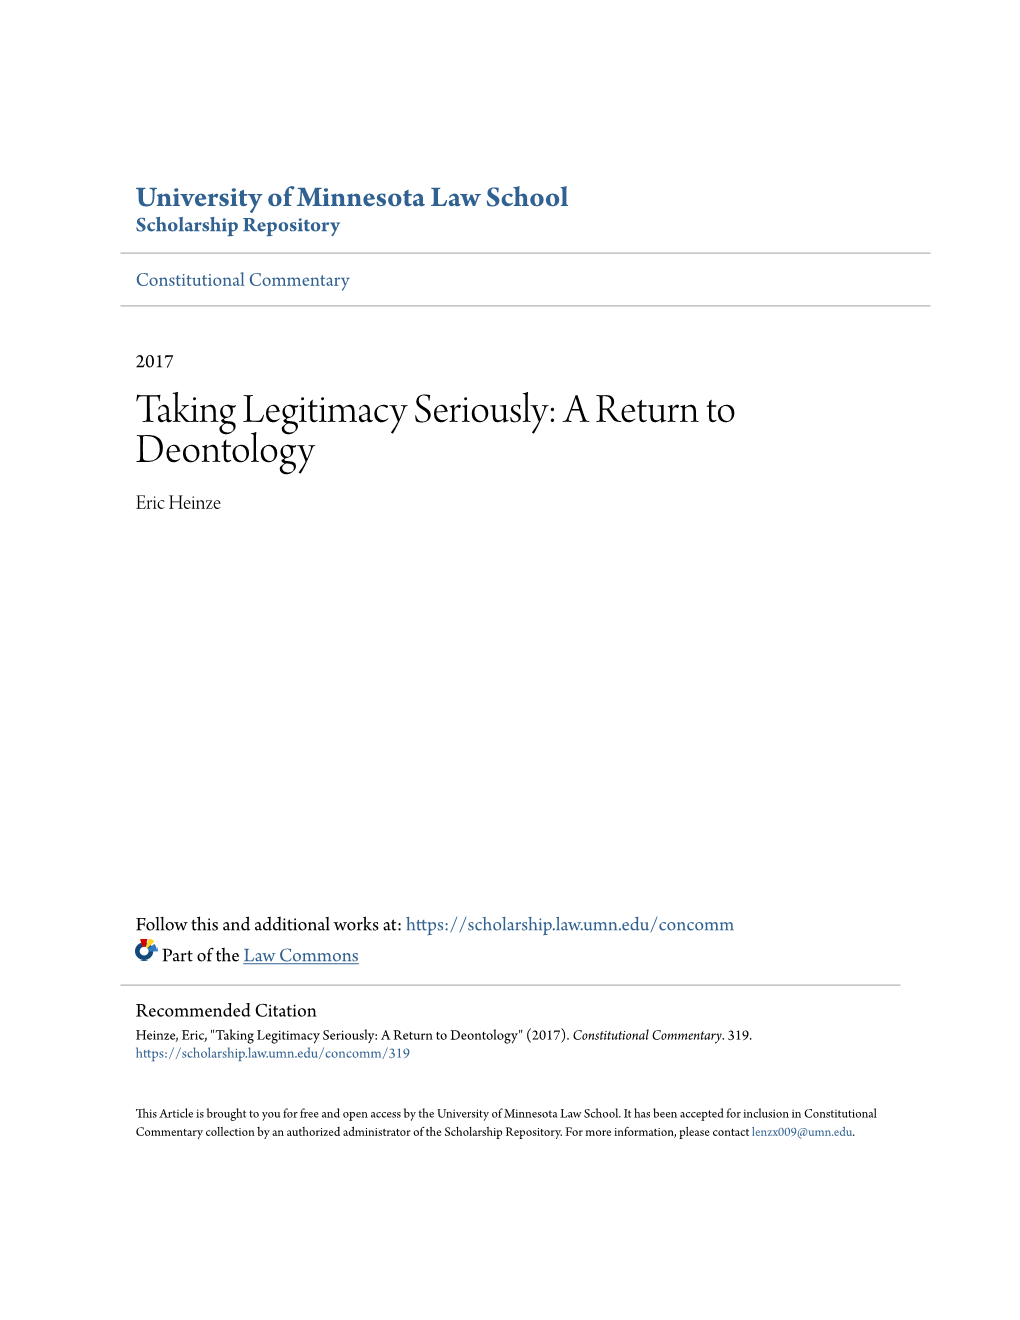 Taking Legitimacy Seriously: a Return to Deontology Eric Heinze